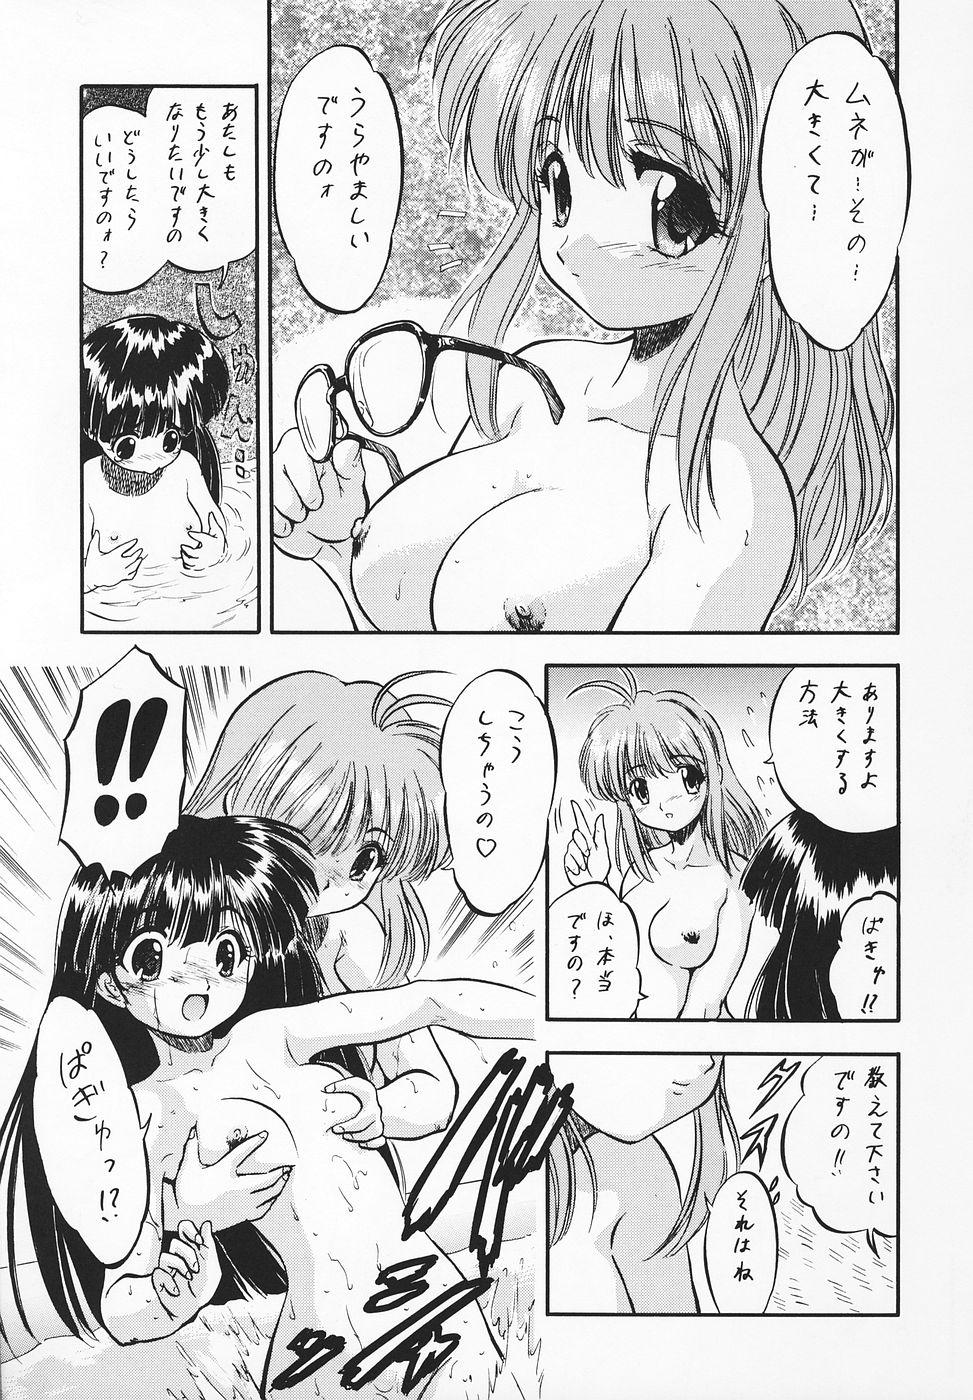 Penetration Happa Janaimon! - To heart Comic party Curves - Page 6